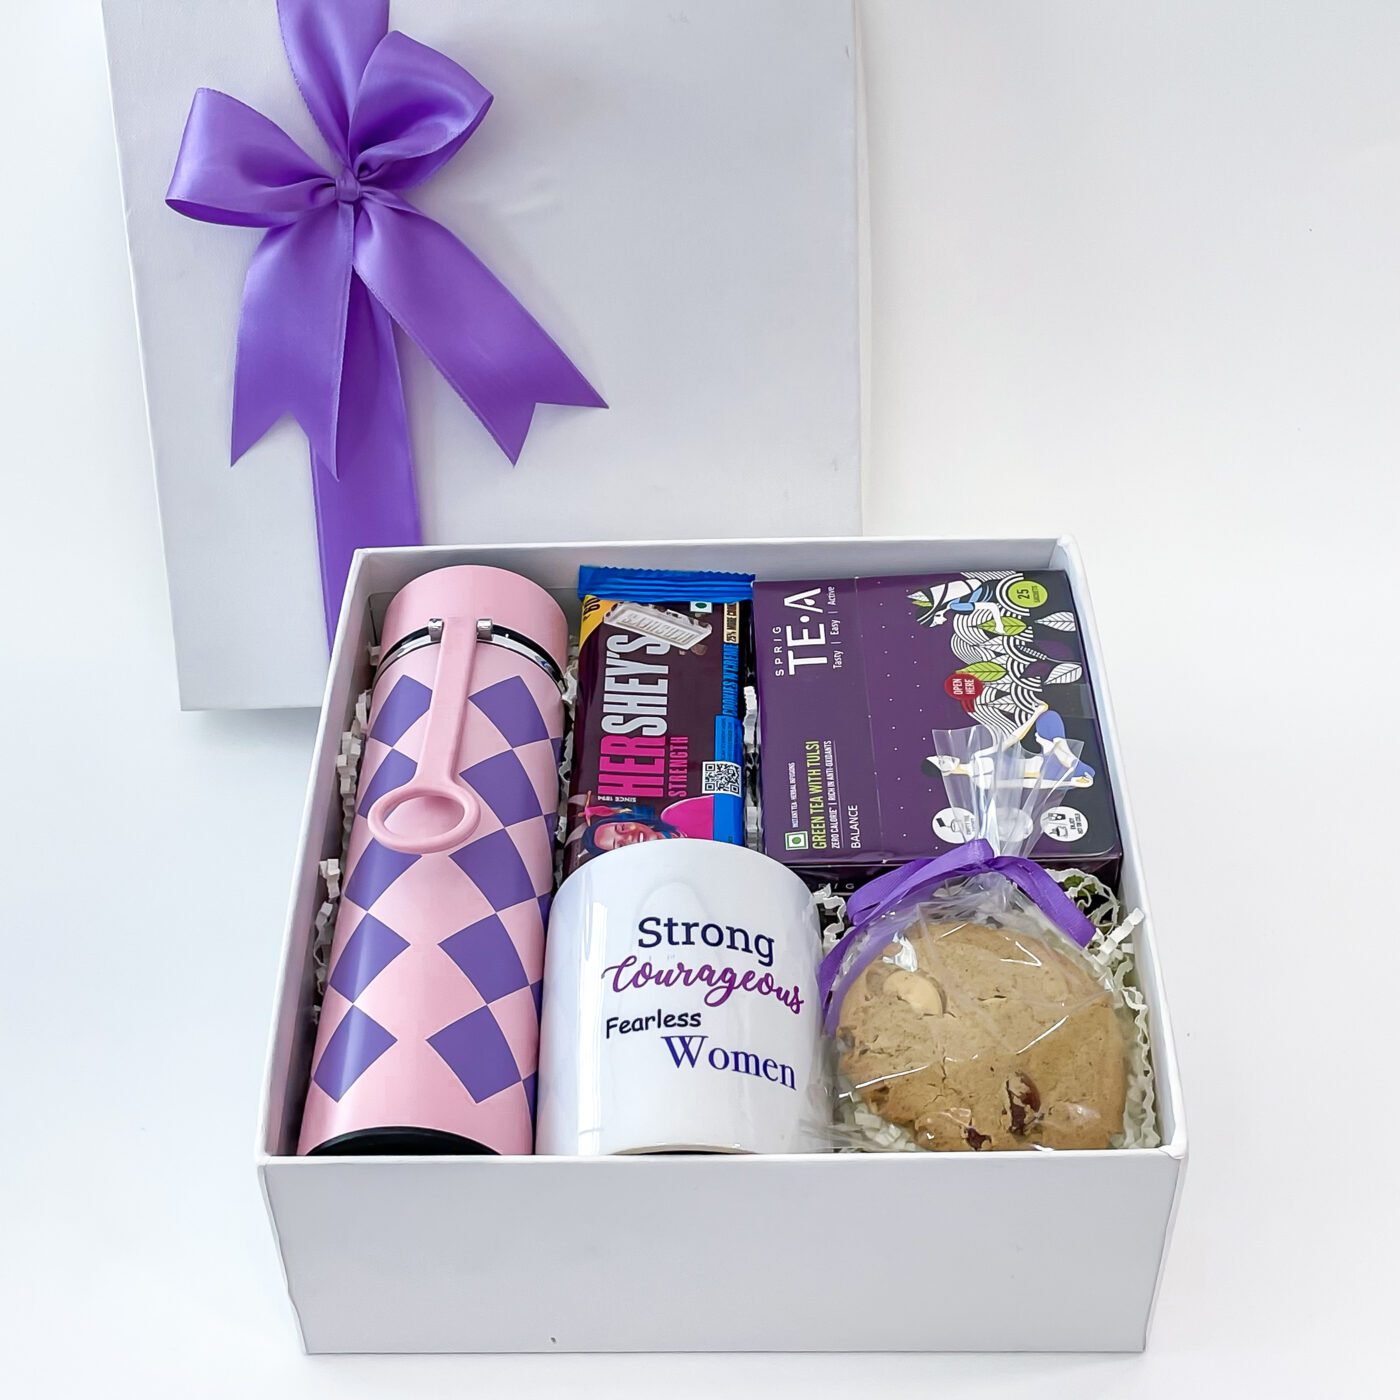 Corporate Gifts for Diwali: Healthy Corporate Gifting Options for Diwali